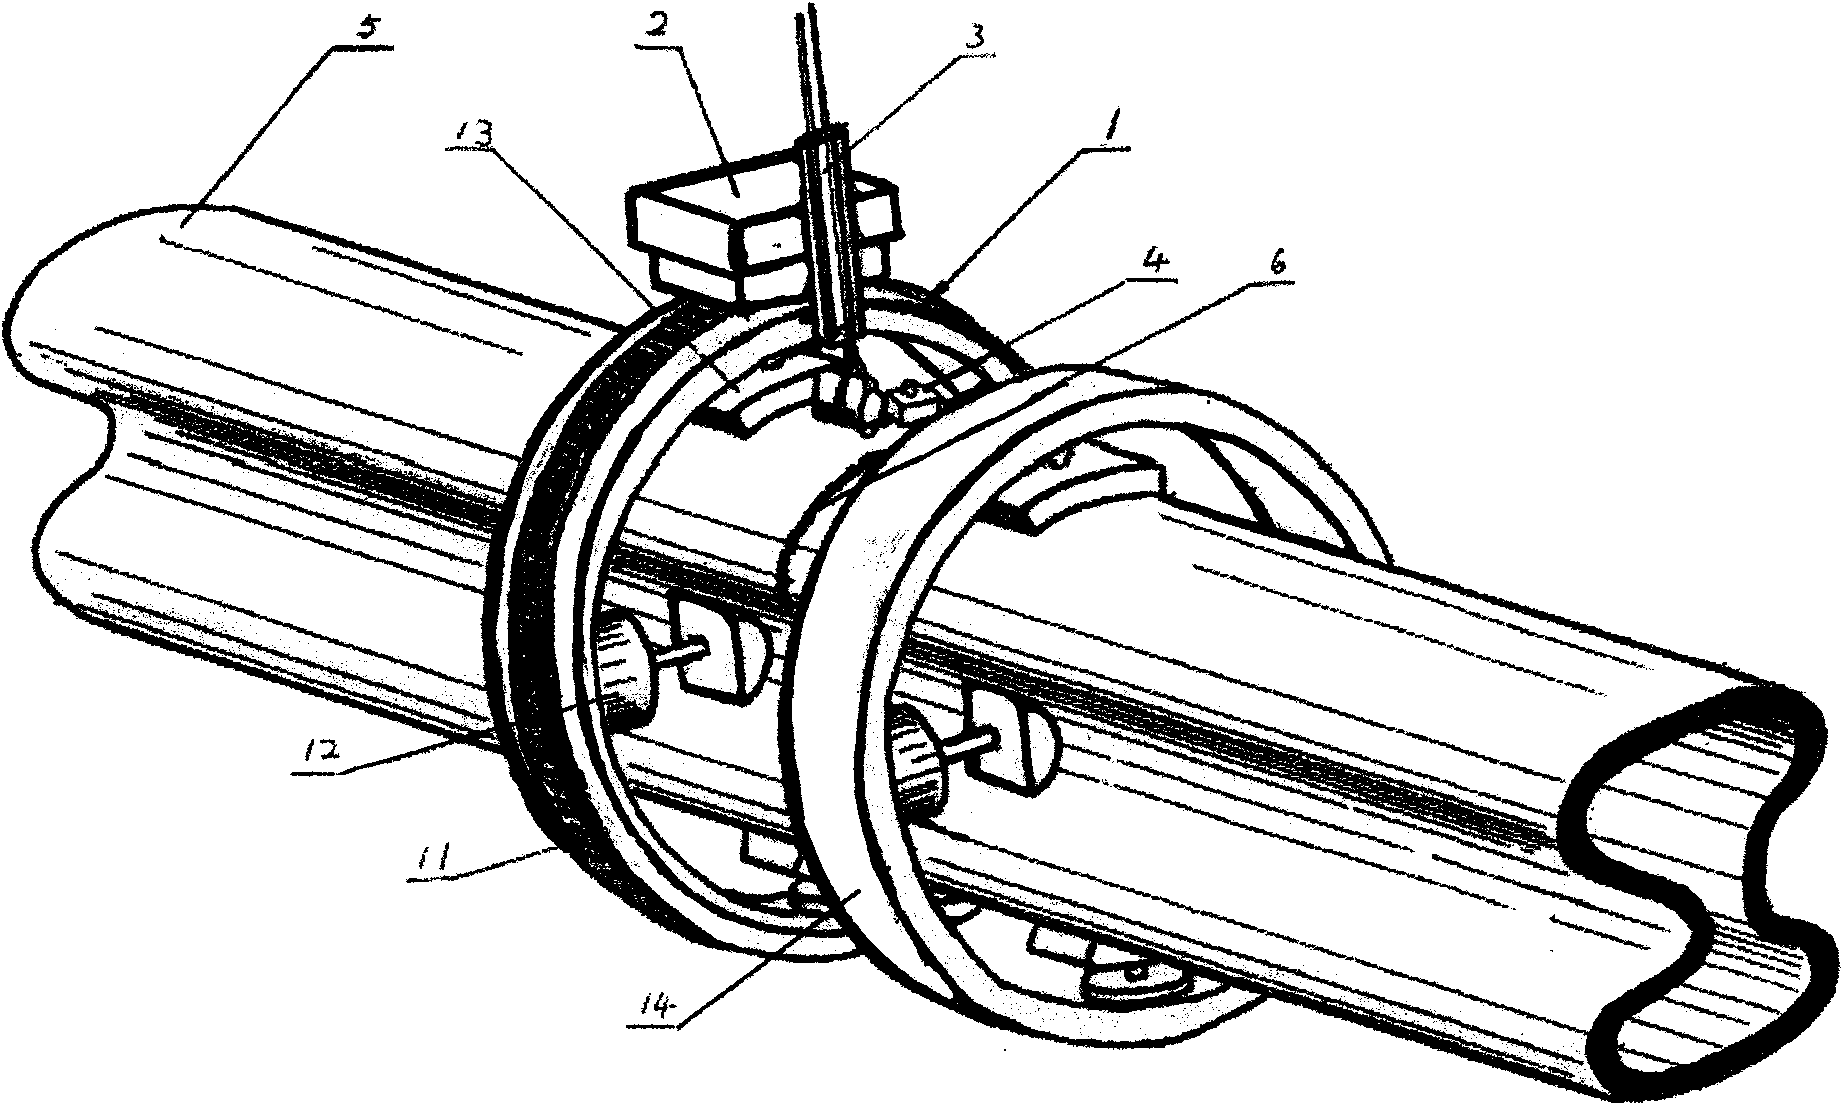 Automatic welding and cutting device for modified cross-section bellows